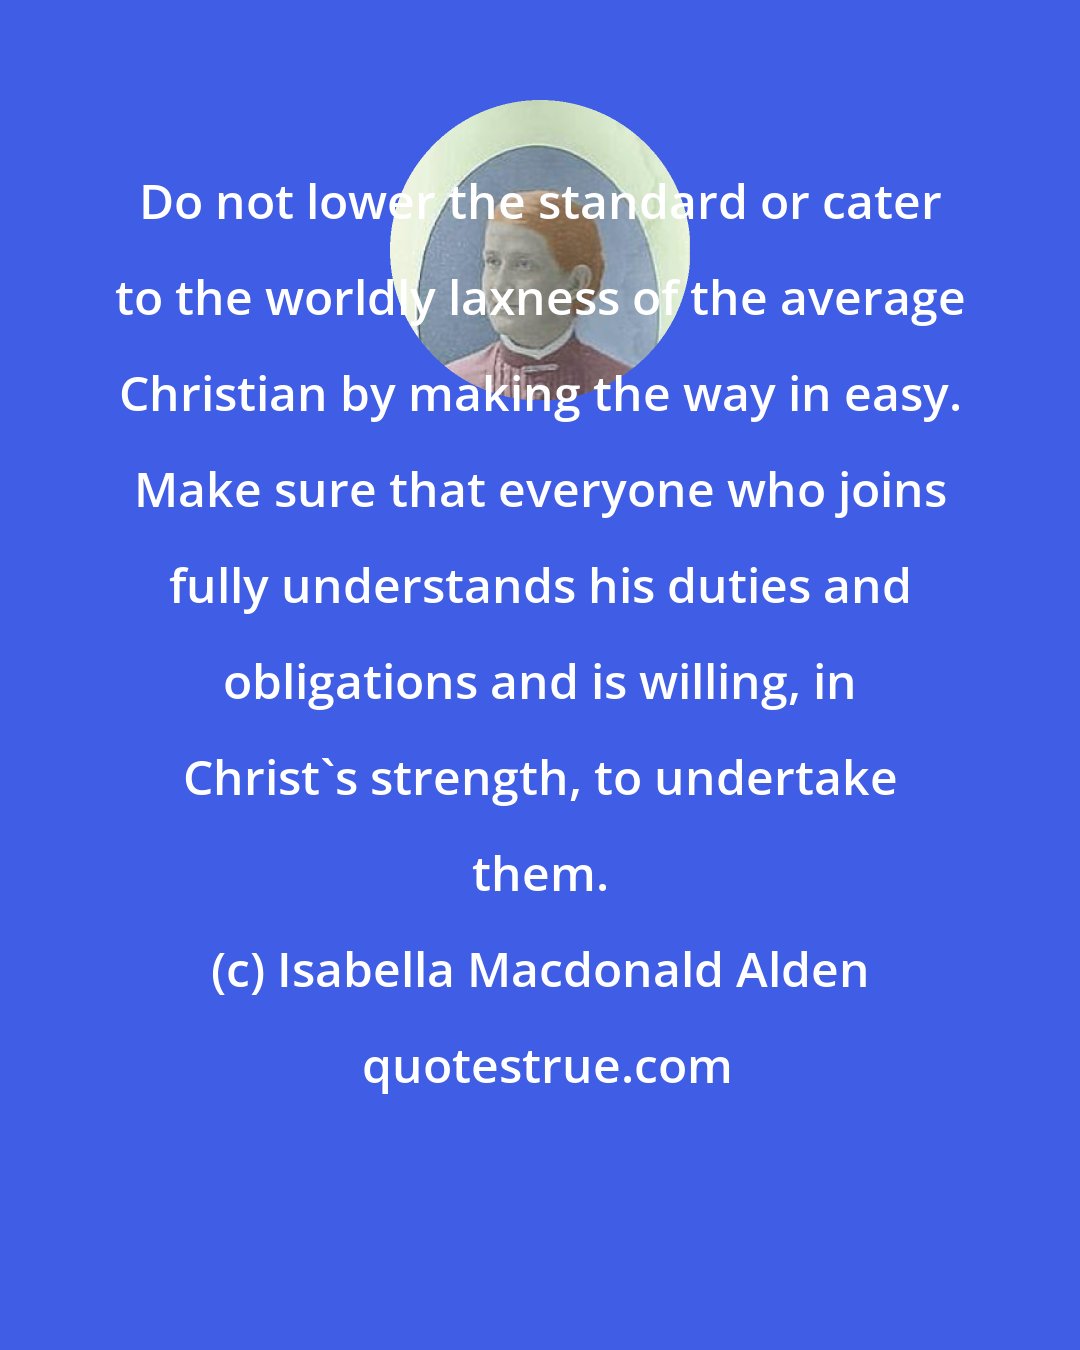 Isabella Macdonald Alden: Do not lower the standard or cater to the worldly laxness of the average Christian by making the way in easy. Make sure that everyone who joins fully understands his duties and obligations and is willing, in Christ's strength, to undertake them.